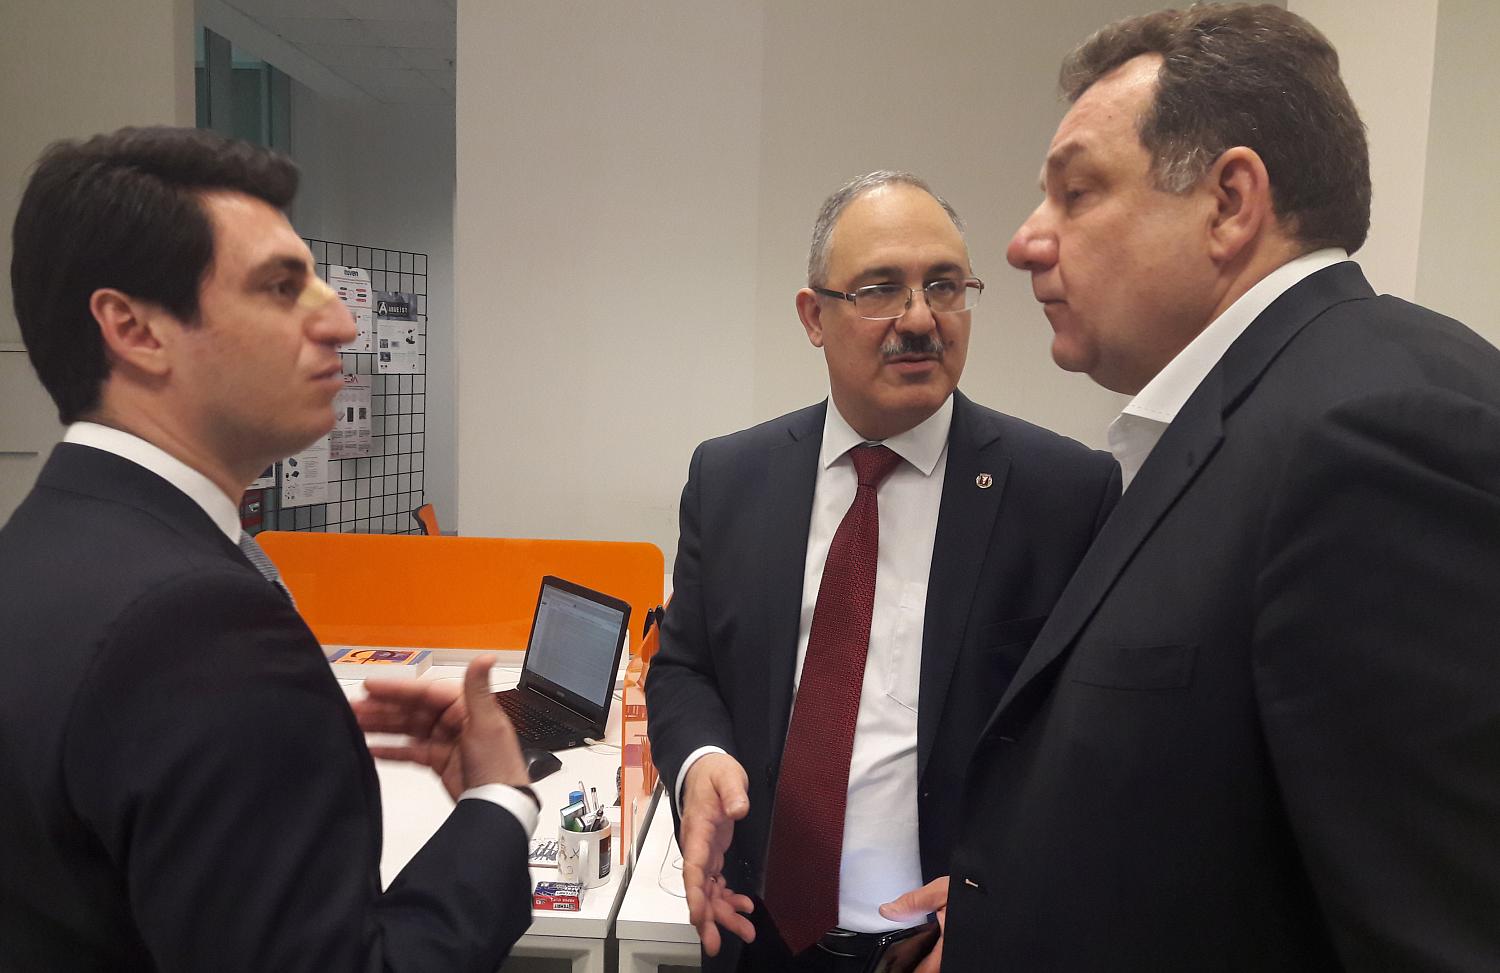 Moscow and Istanbul exchanged experience in the field of opening and development of technoparks